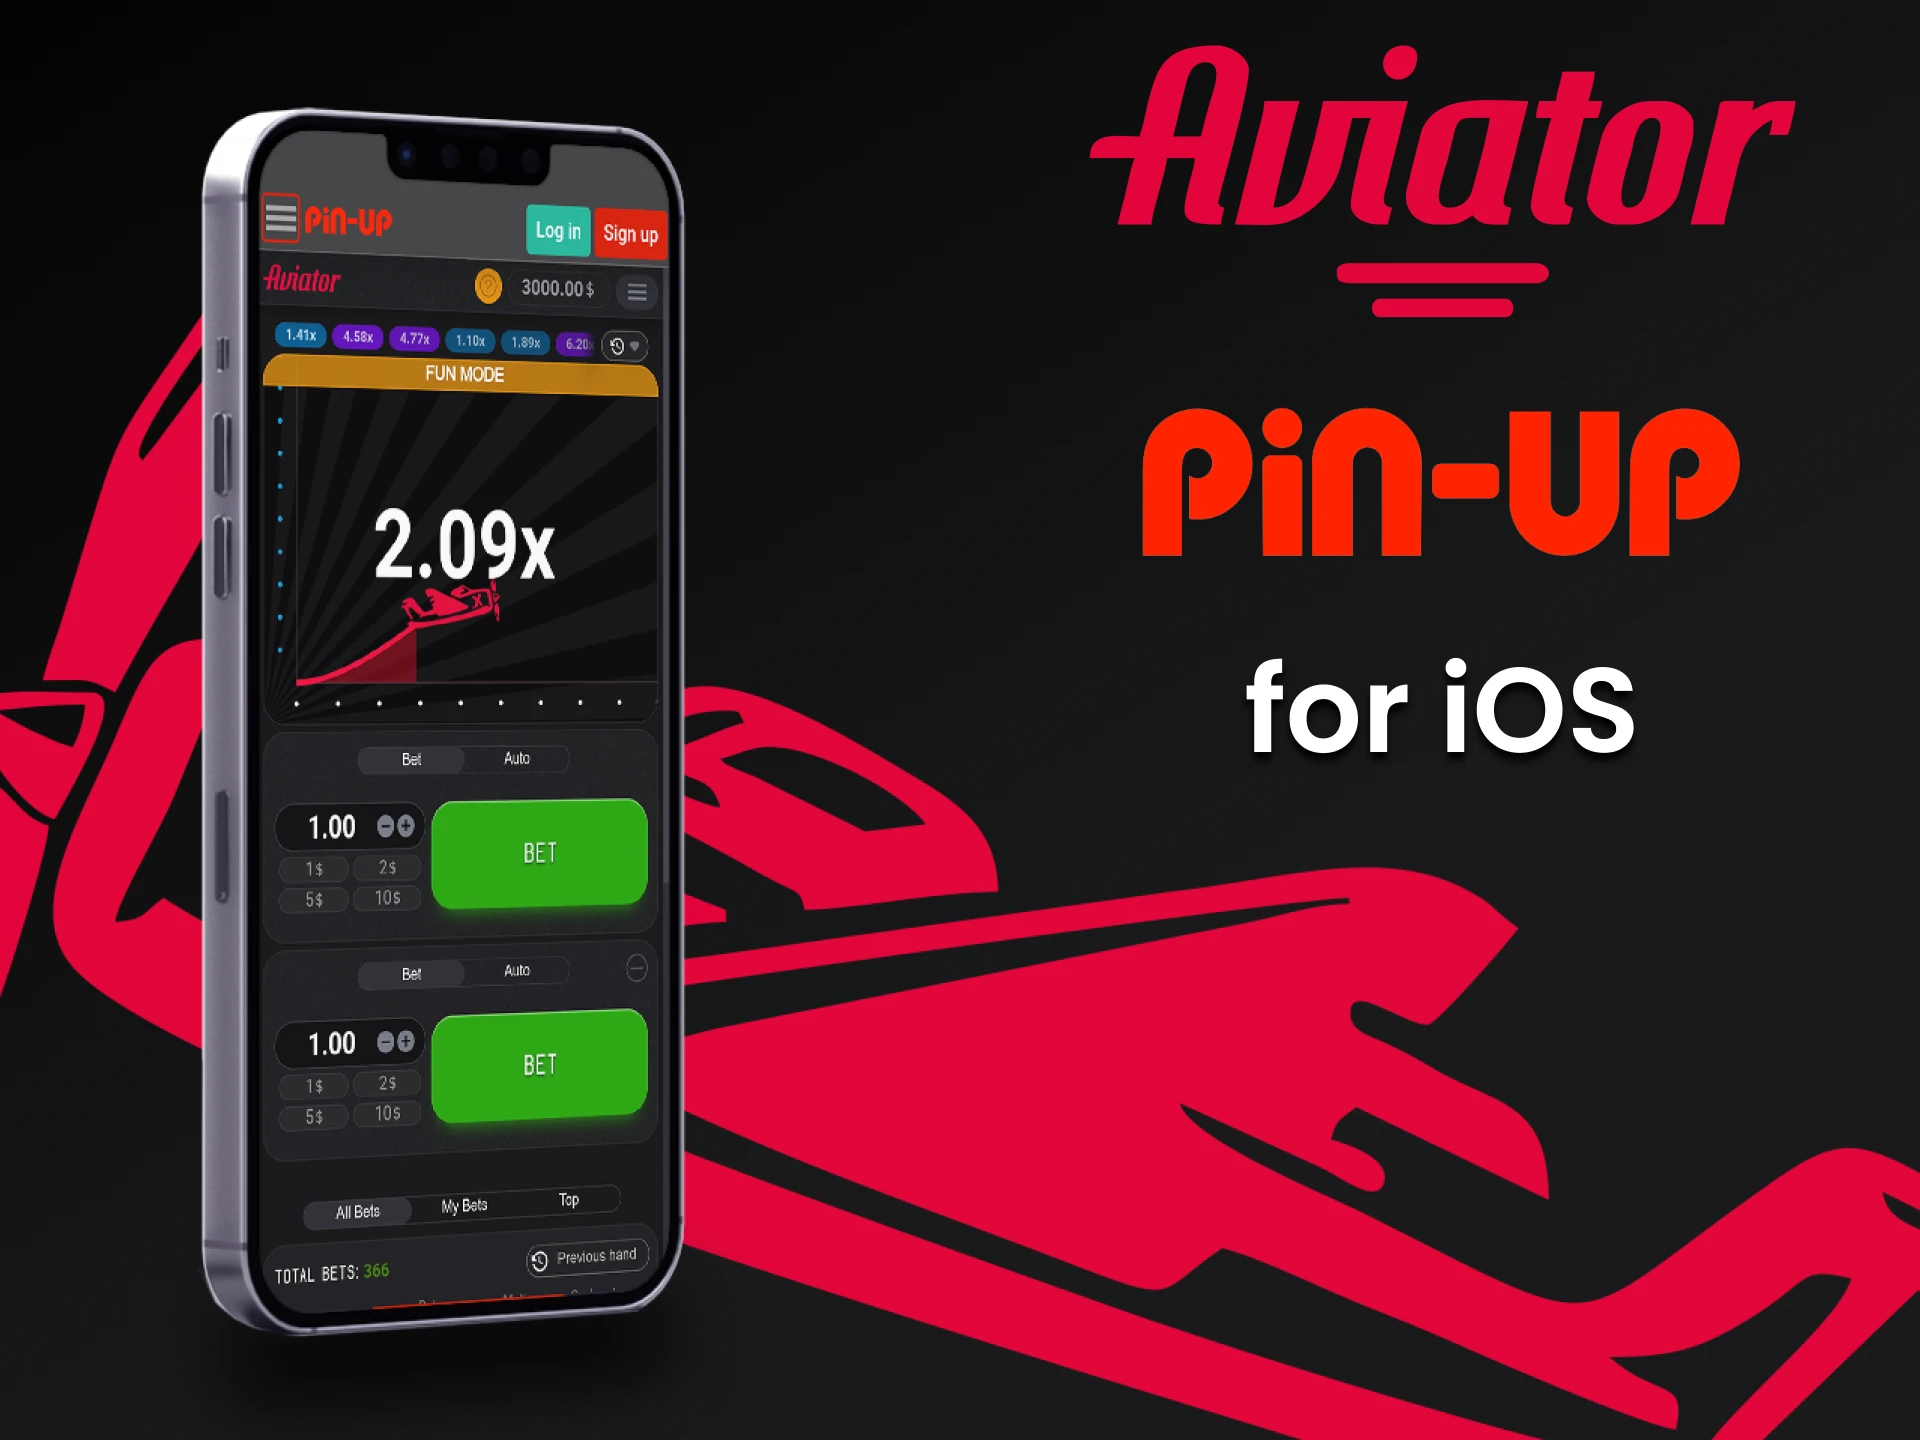 Download the Pin Up app for iOS.